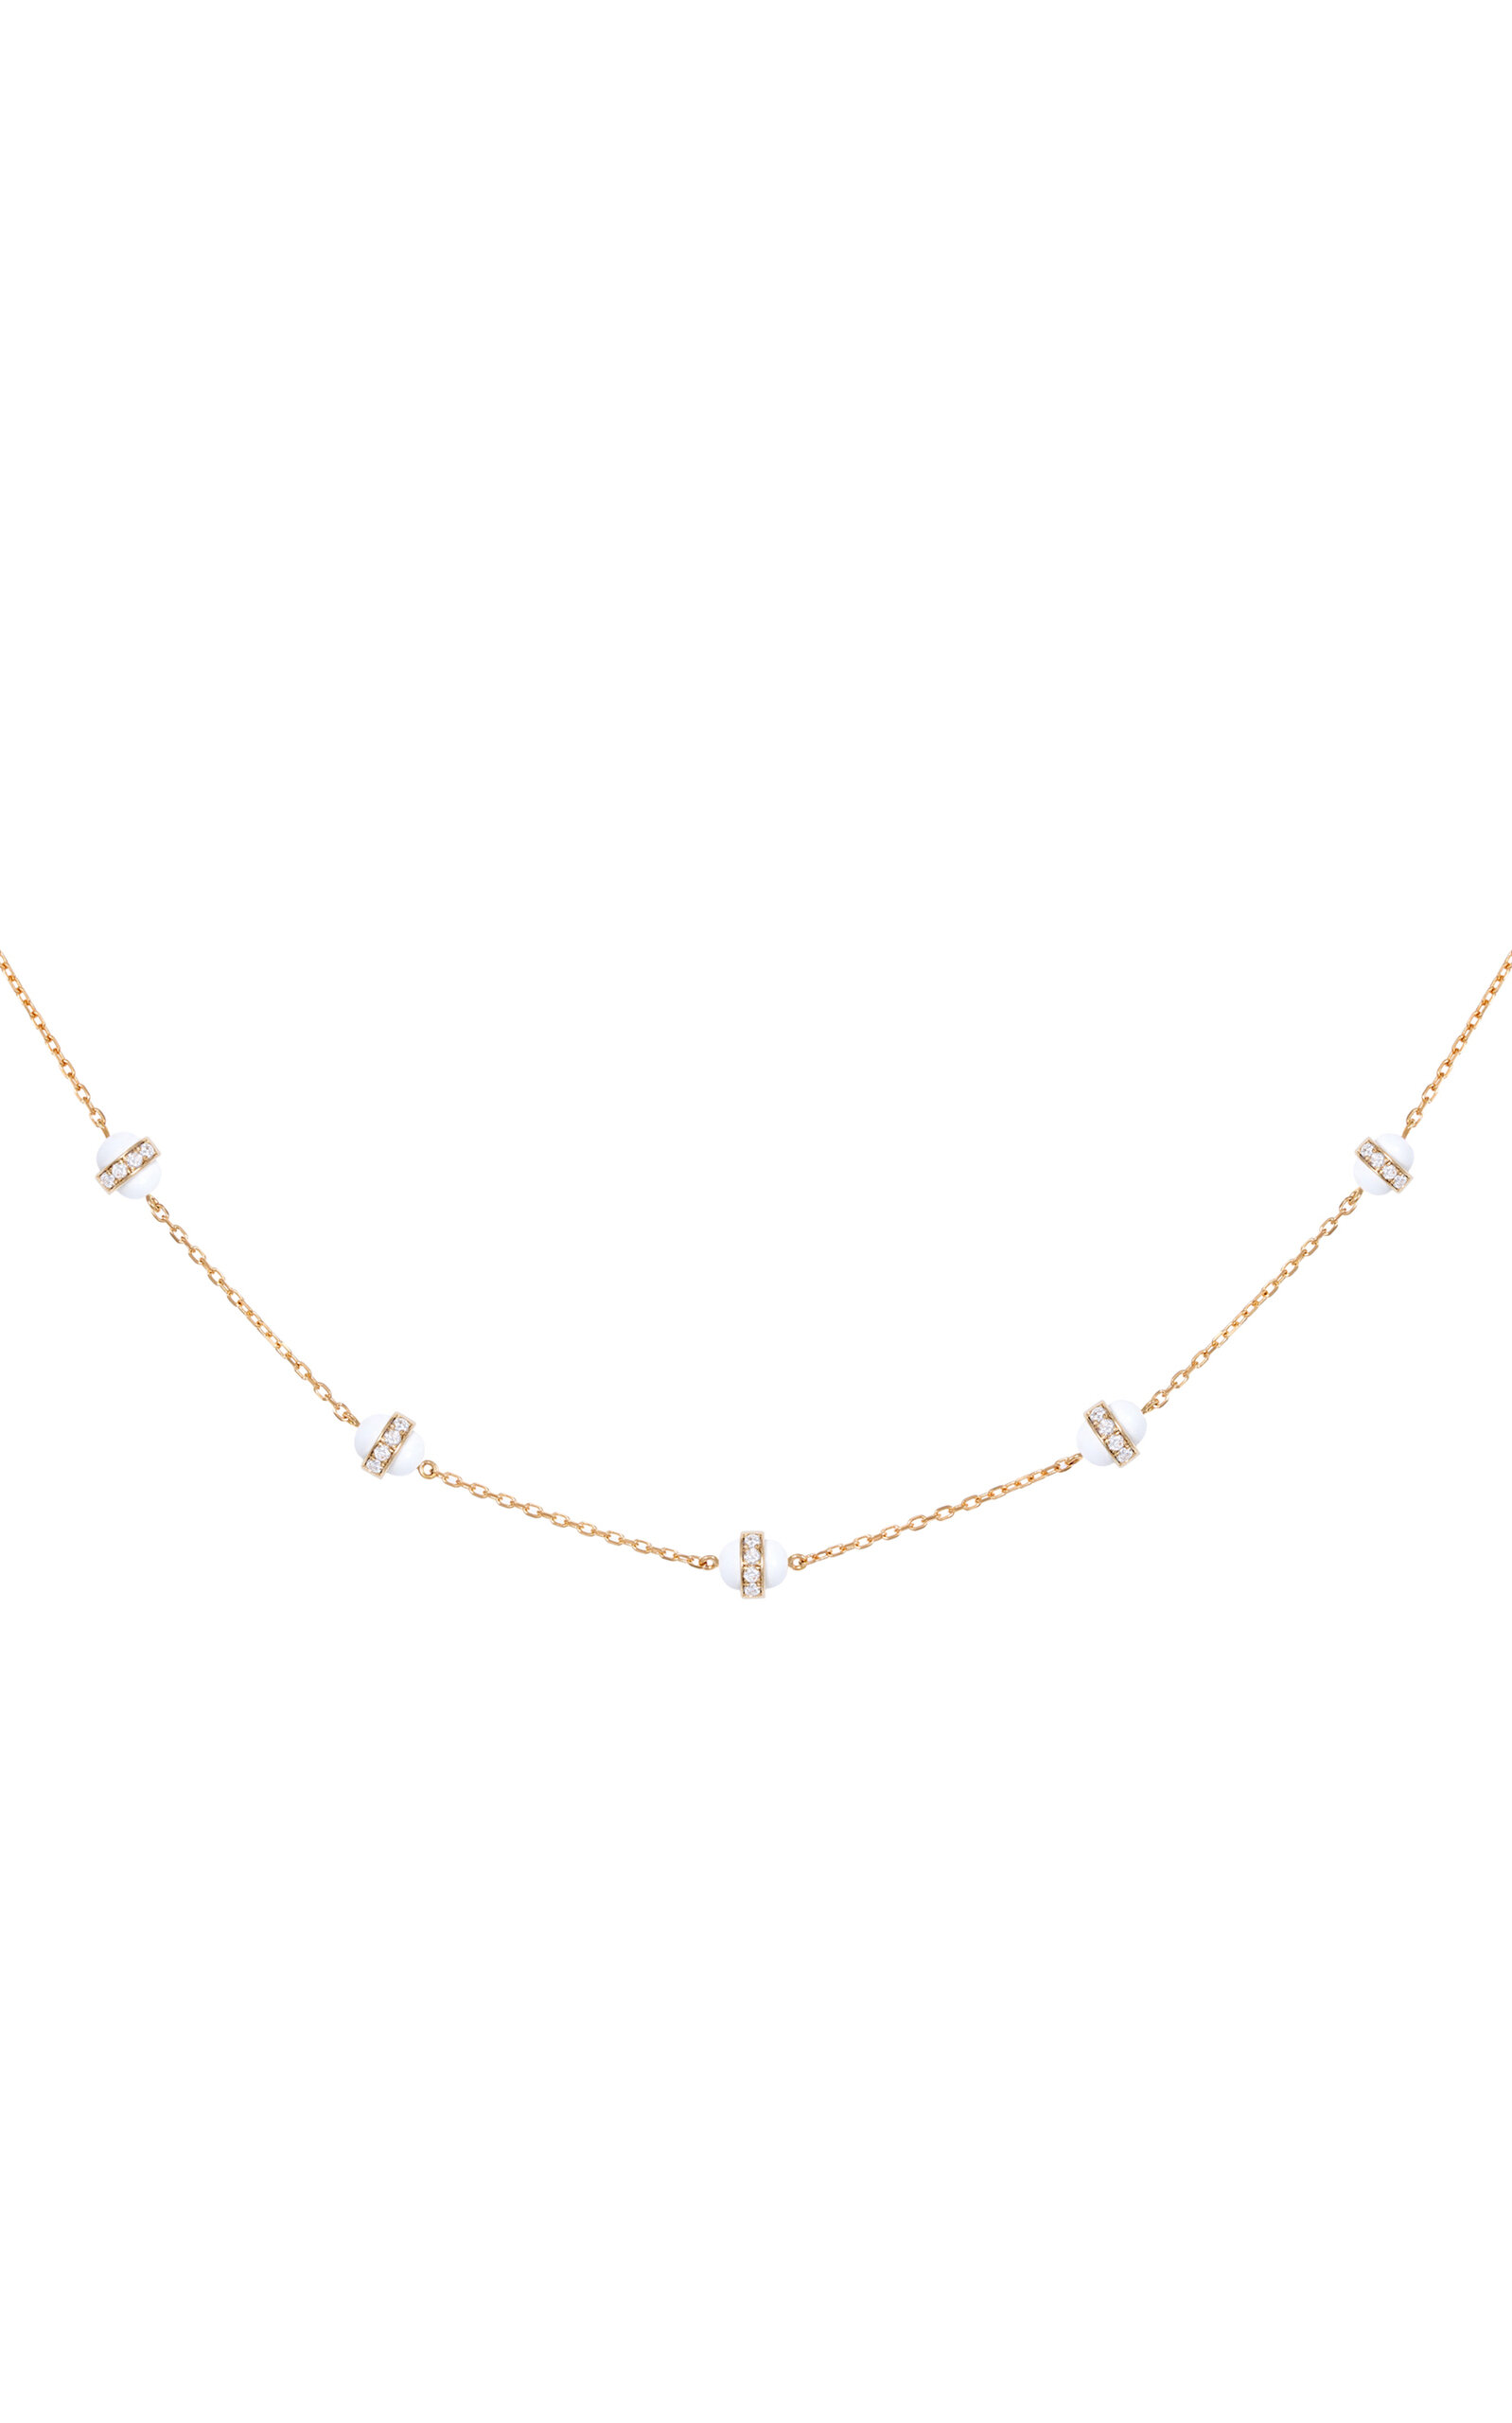 18K Yellow Gold The 5 Dots Hydrogen Diamond and White Enamel Necklace